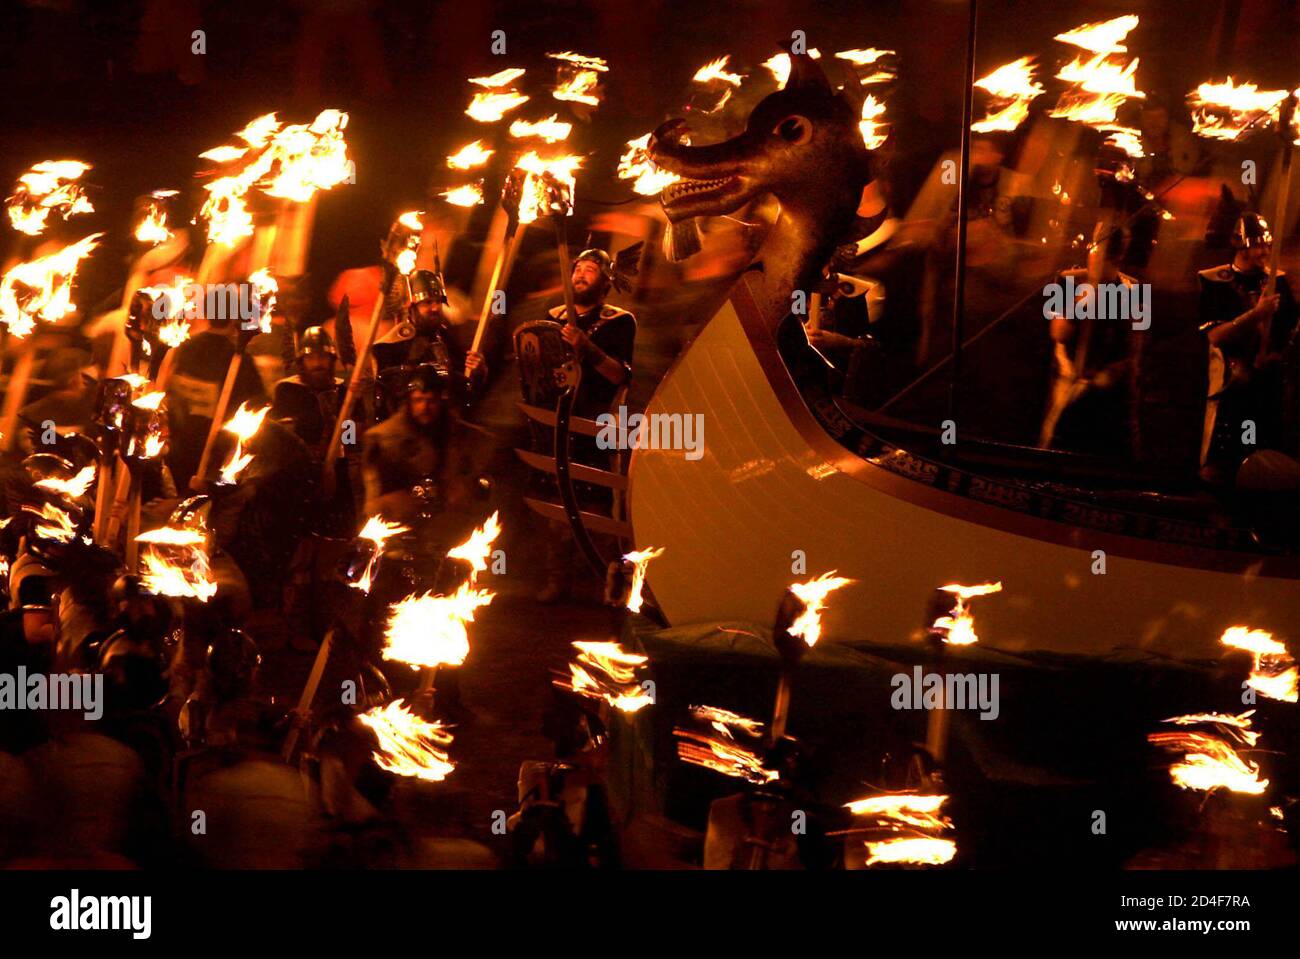 Locals dressed in costume throw burning torches as they surround a replica Viking galley in Lerwick during the Up Helly Aa Festival on the Island of Shetland in Scotland January 25, 2005. The Up Helly Aa Festival, introduced by men returning from the Napoleonic Wars of the early 19th century, takes place annually on the lastTuesday of January. Participants drag the replica Viking galley through the streets of Lerwick to a designated point where it is ceremonially burnt. REUTERS/Jeff J Mitchell  JJM Stock Photo